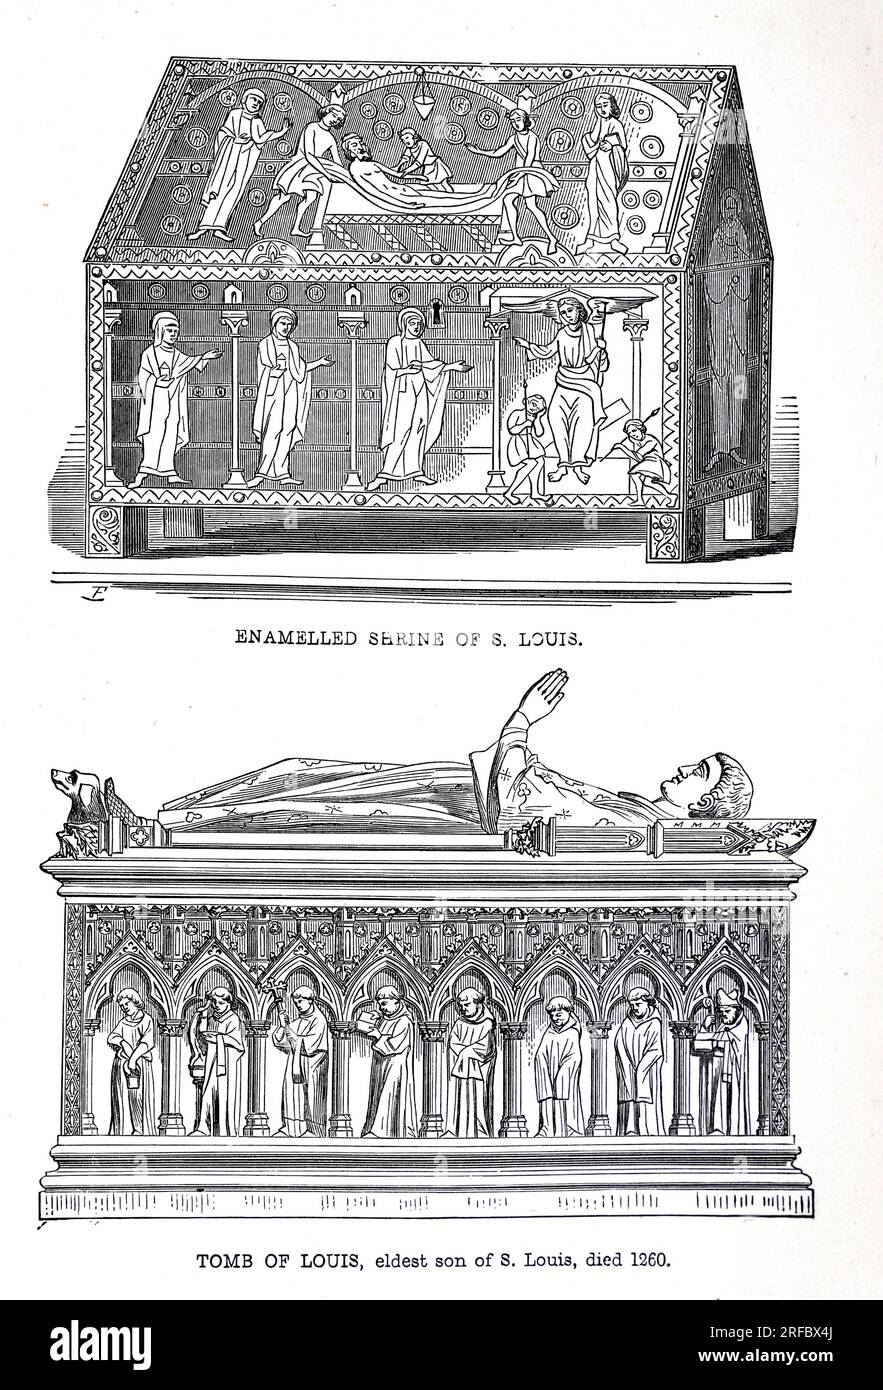 Enamelled shrine of King Louis IX (St Louis) and the tomb of his son in St Denis Basilica, St Denis, France. Engraving from Lives of the Saints by Sabin Baring-Gould. Stock Photo